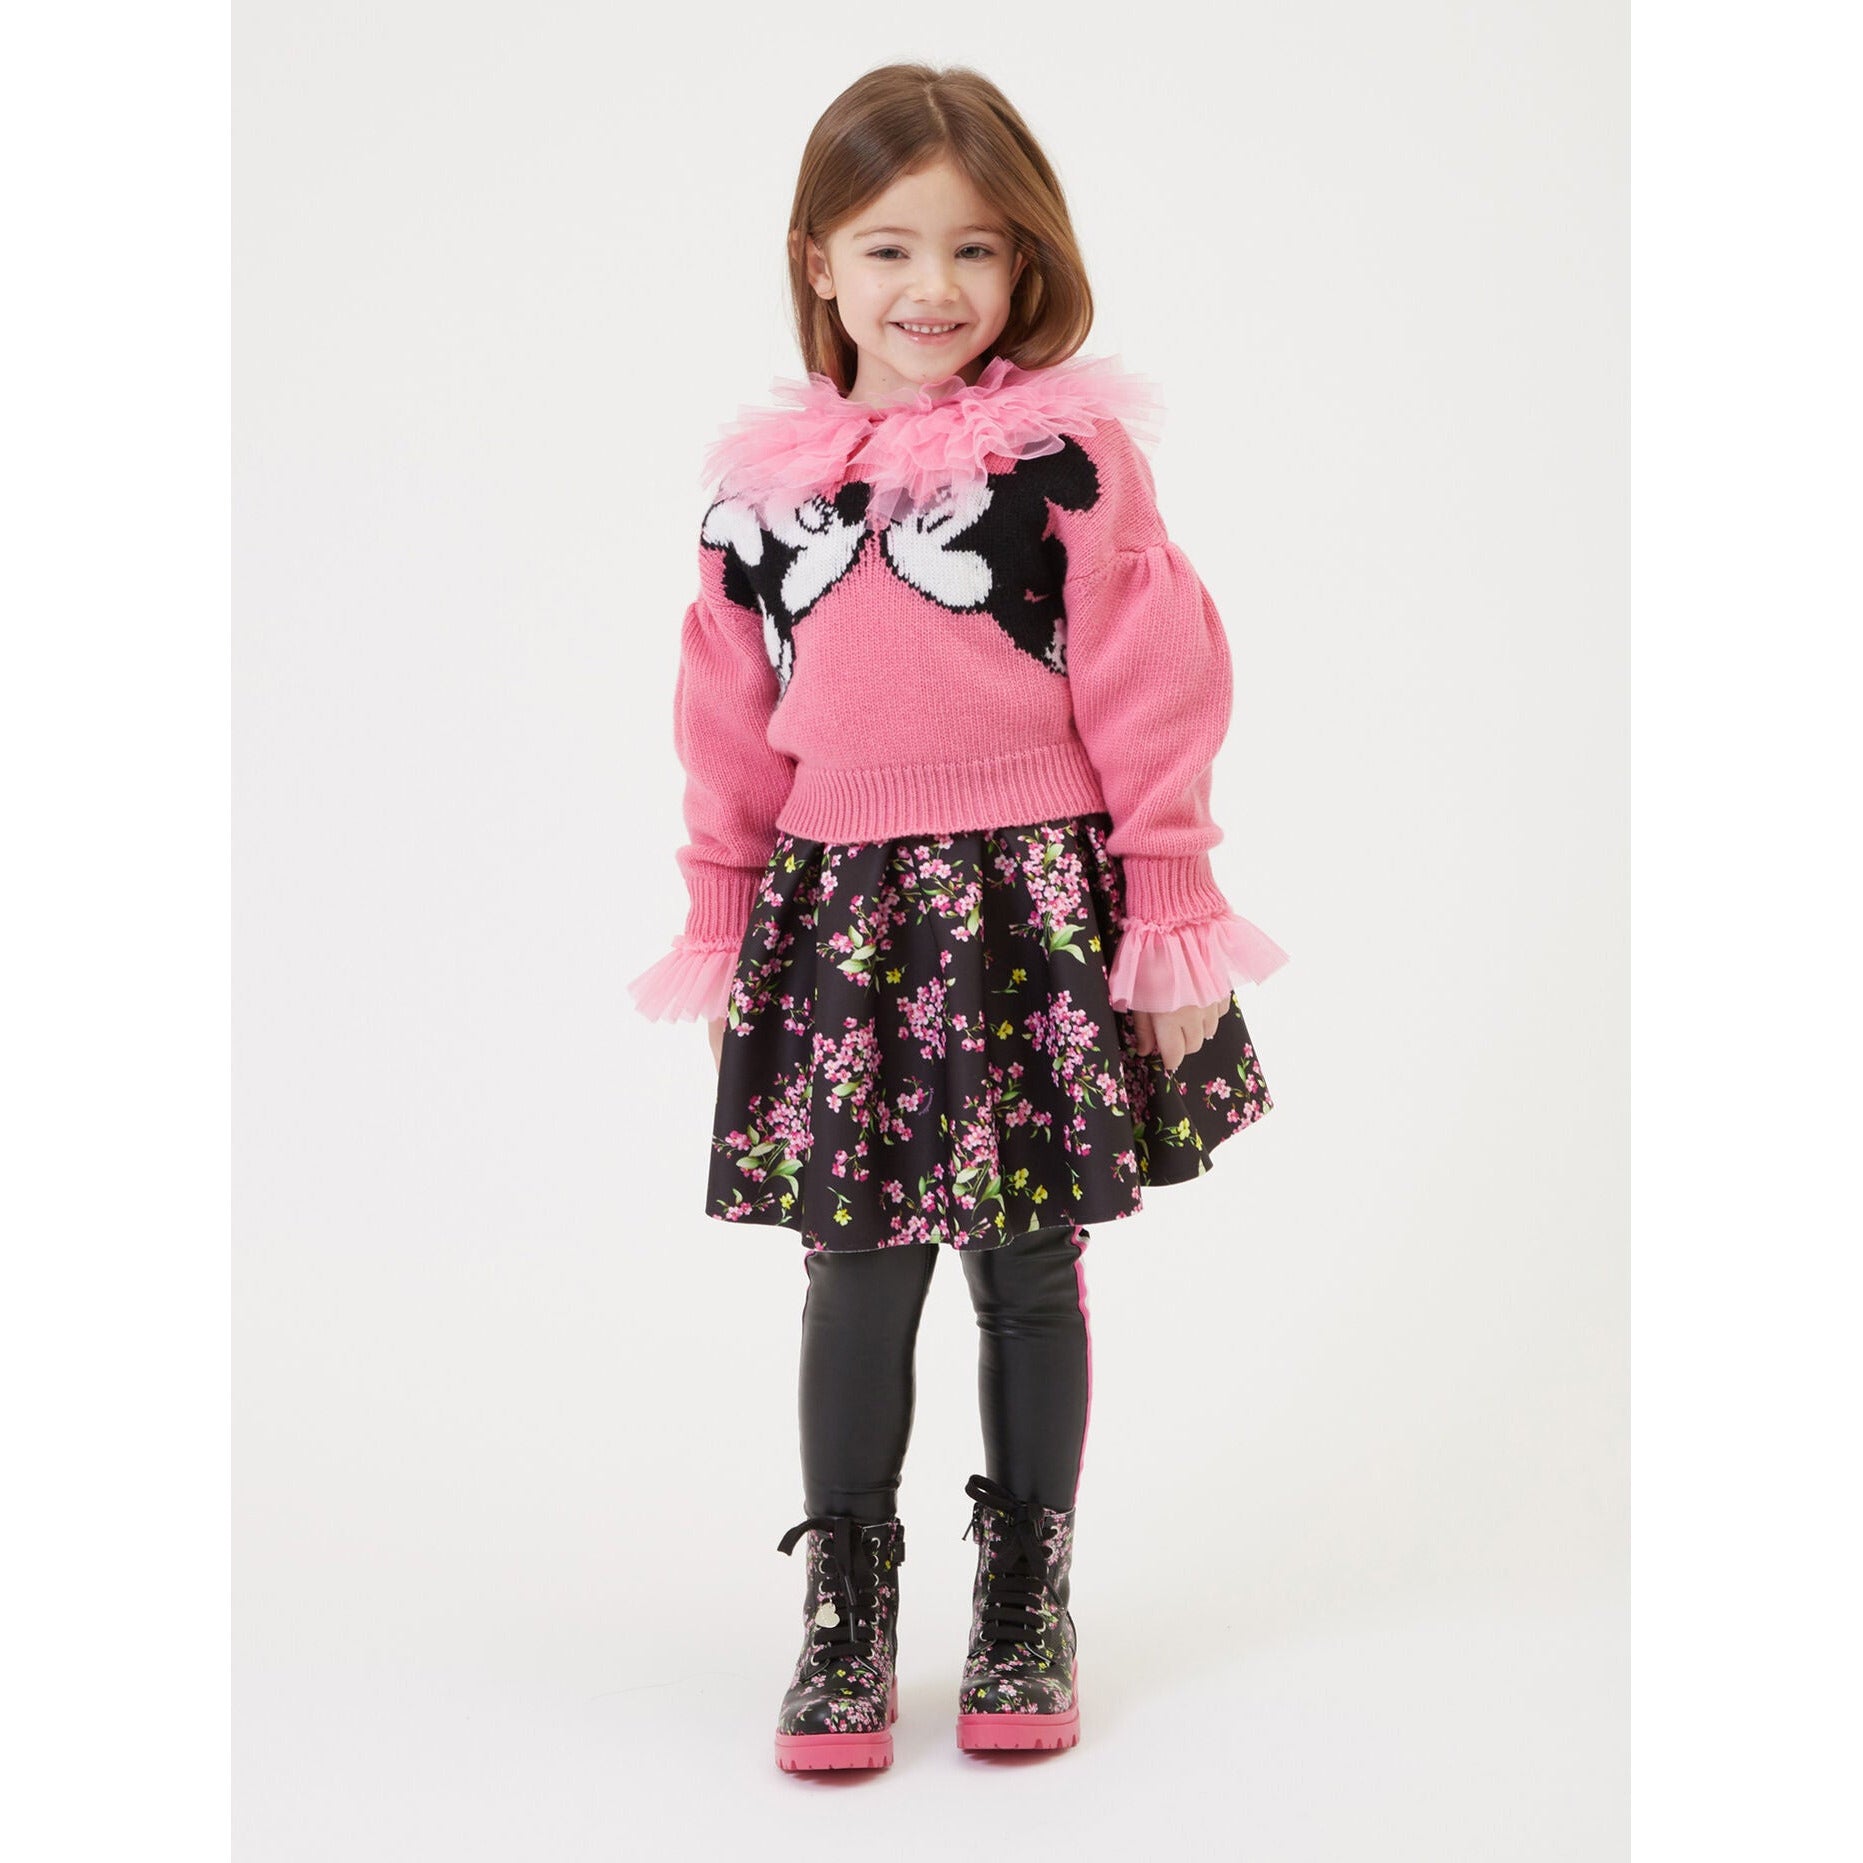 MINNIE AND MICKEY MOUSE MERINO SWEATER